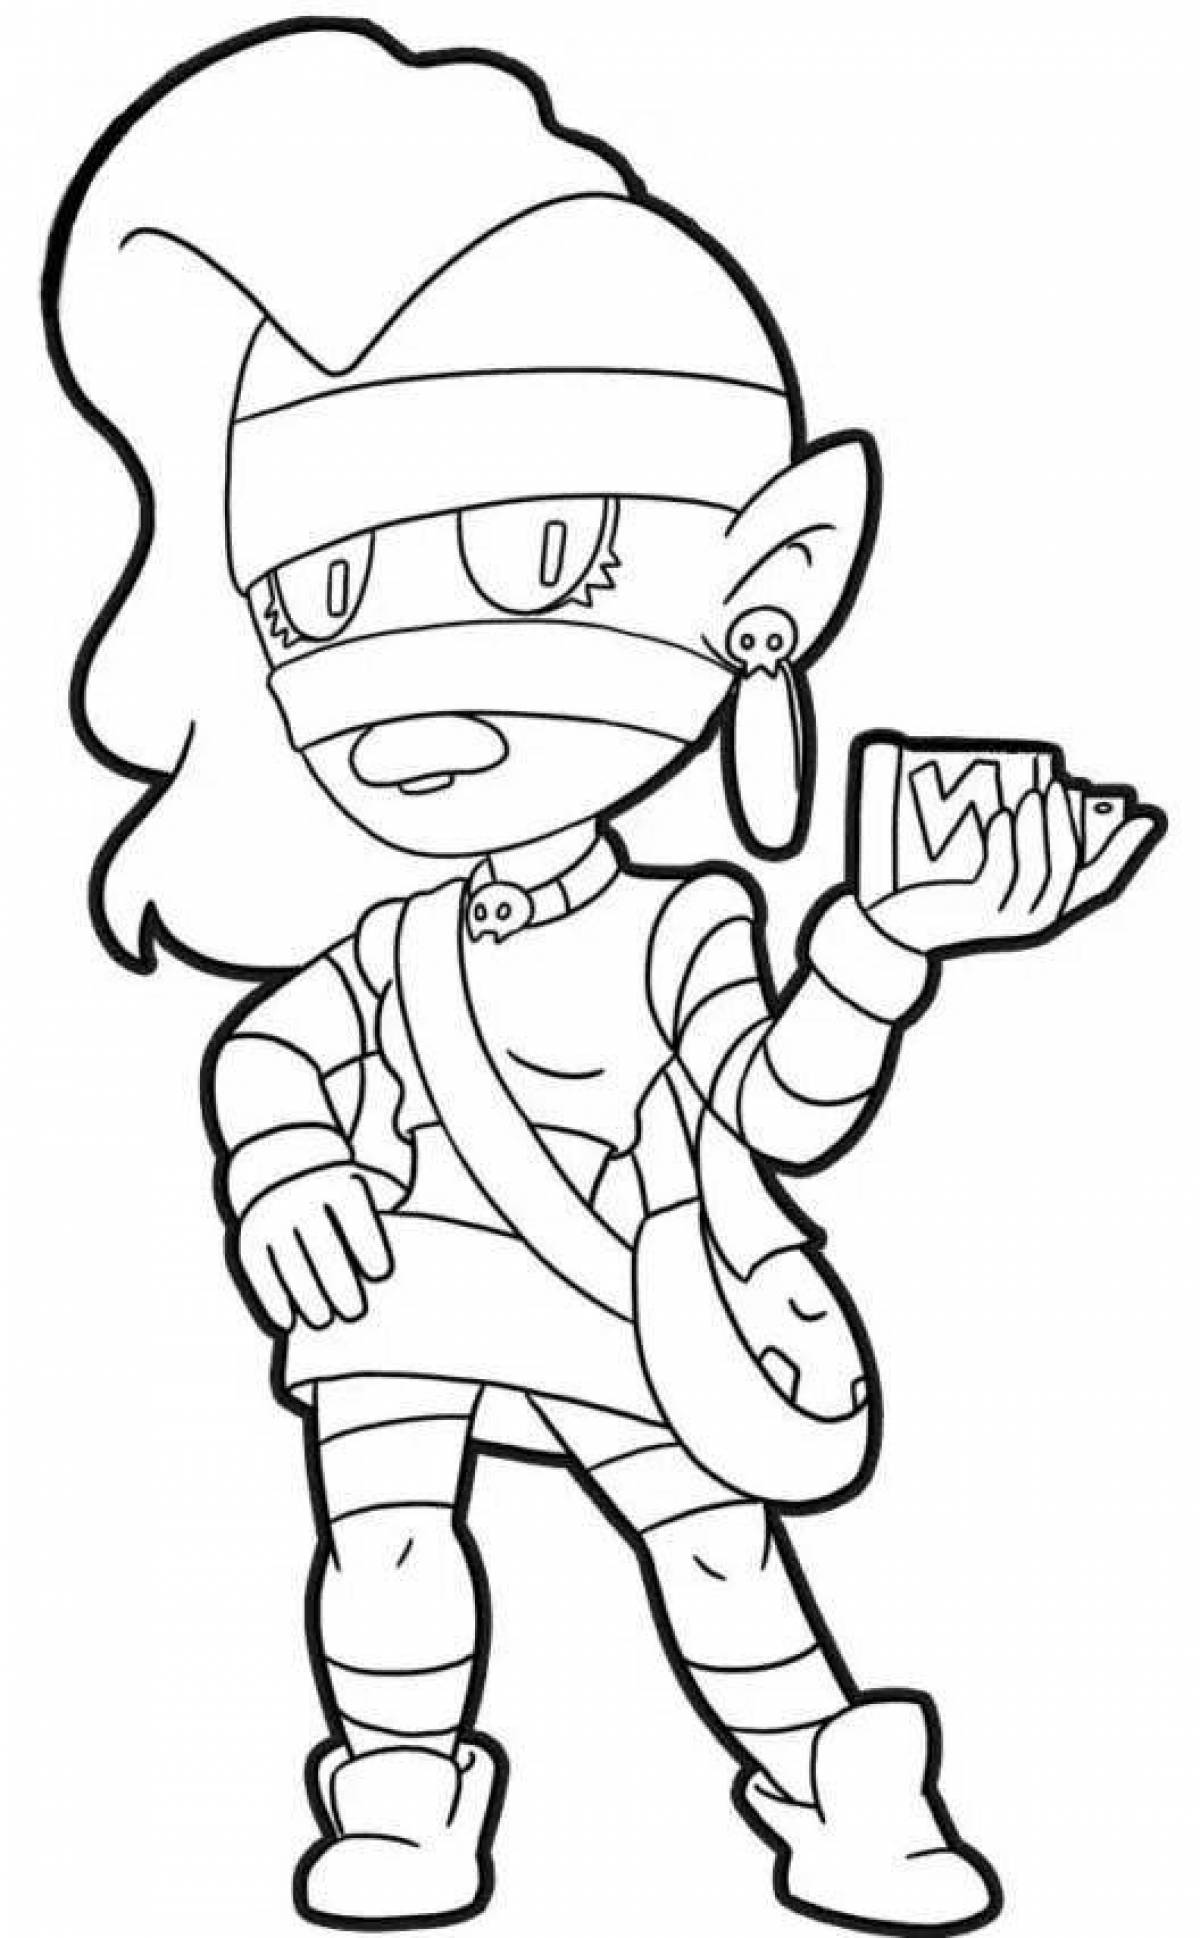 Brawlstars amazing coloring pages